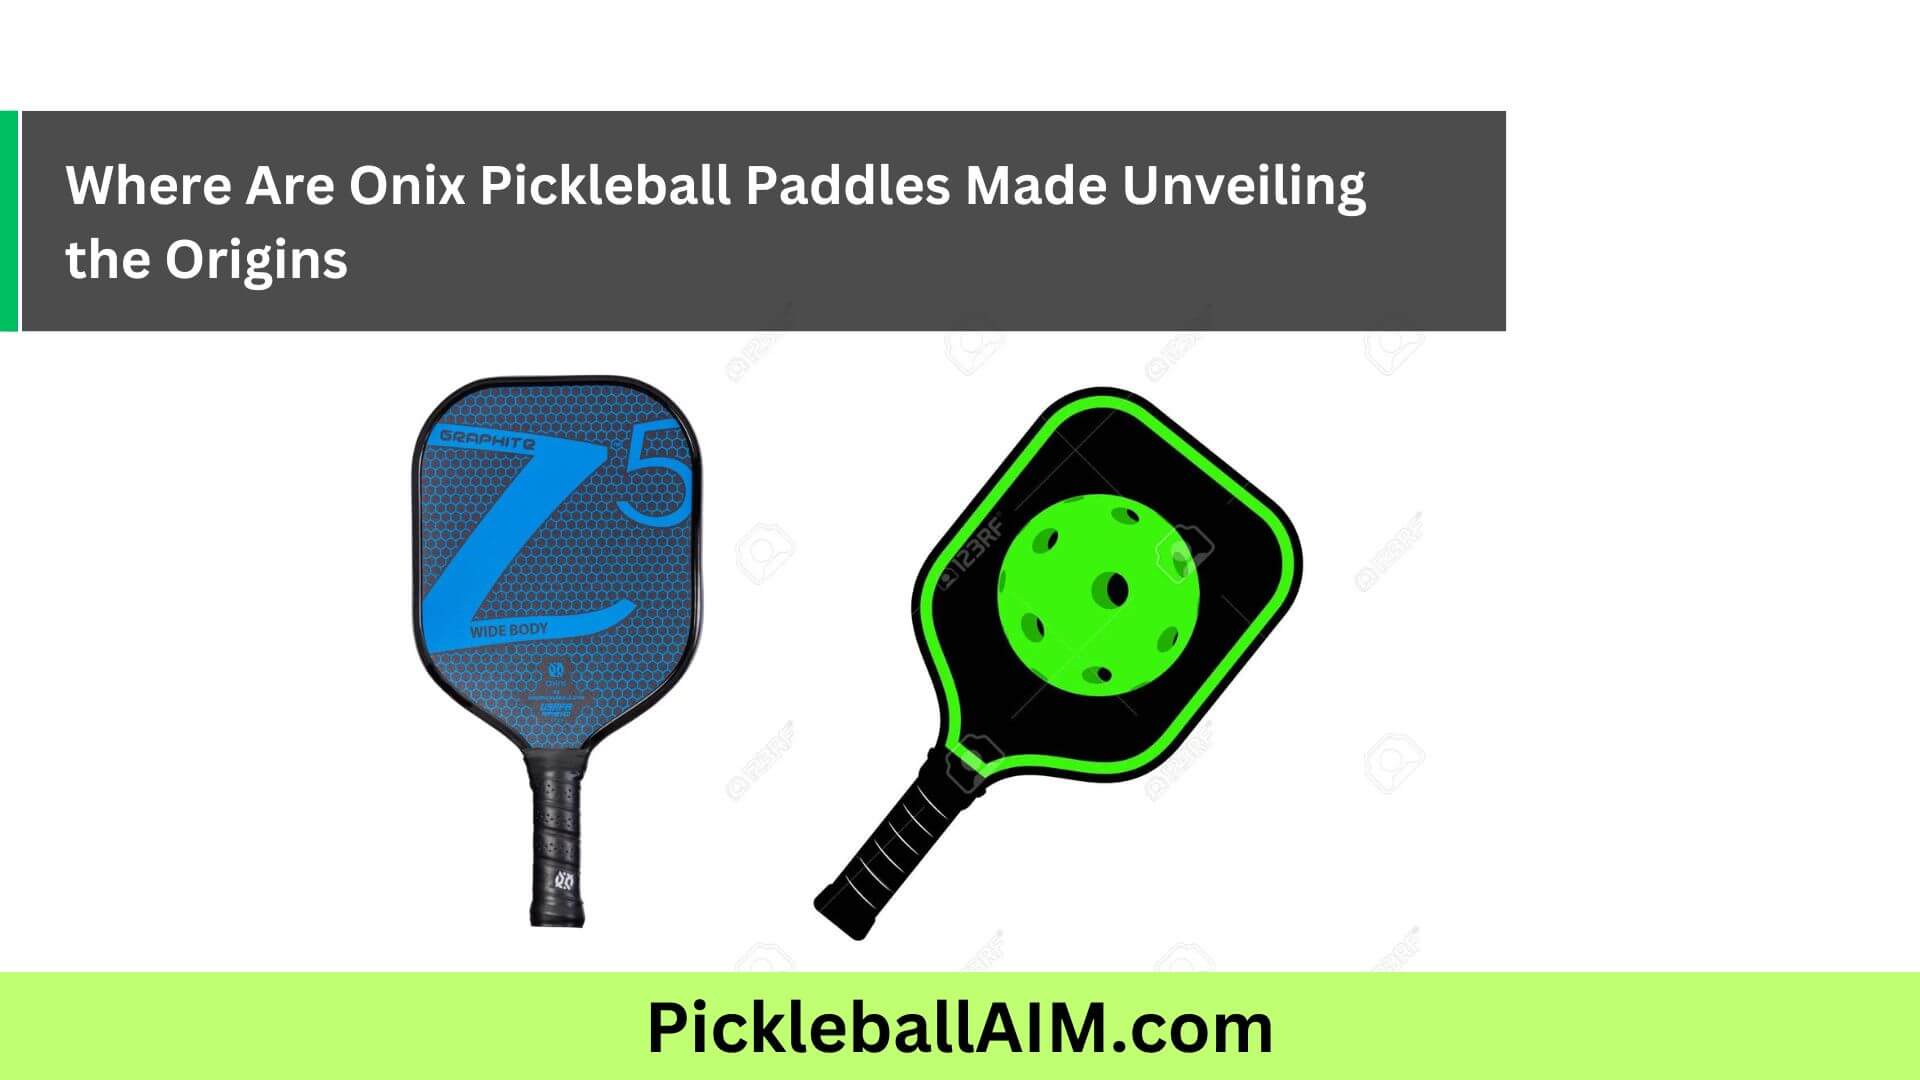 Crafting Excellence The Origins of Onix Pickleball Paddles Revealed